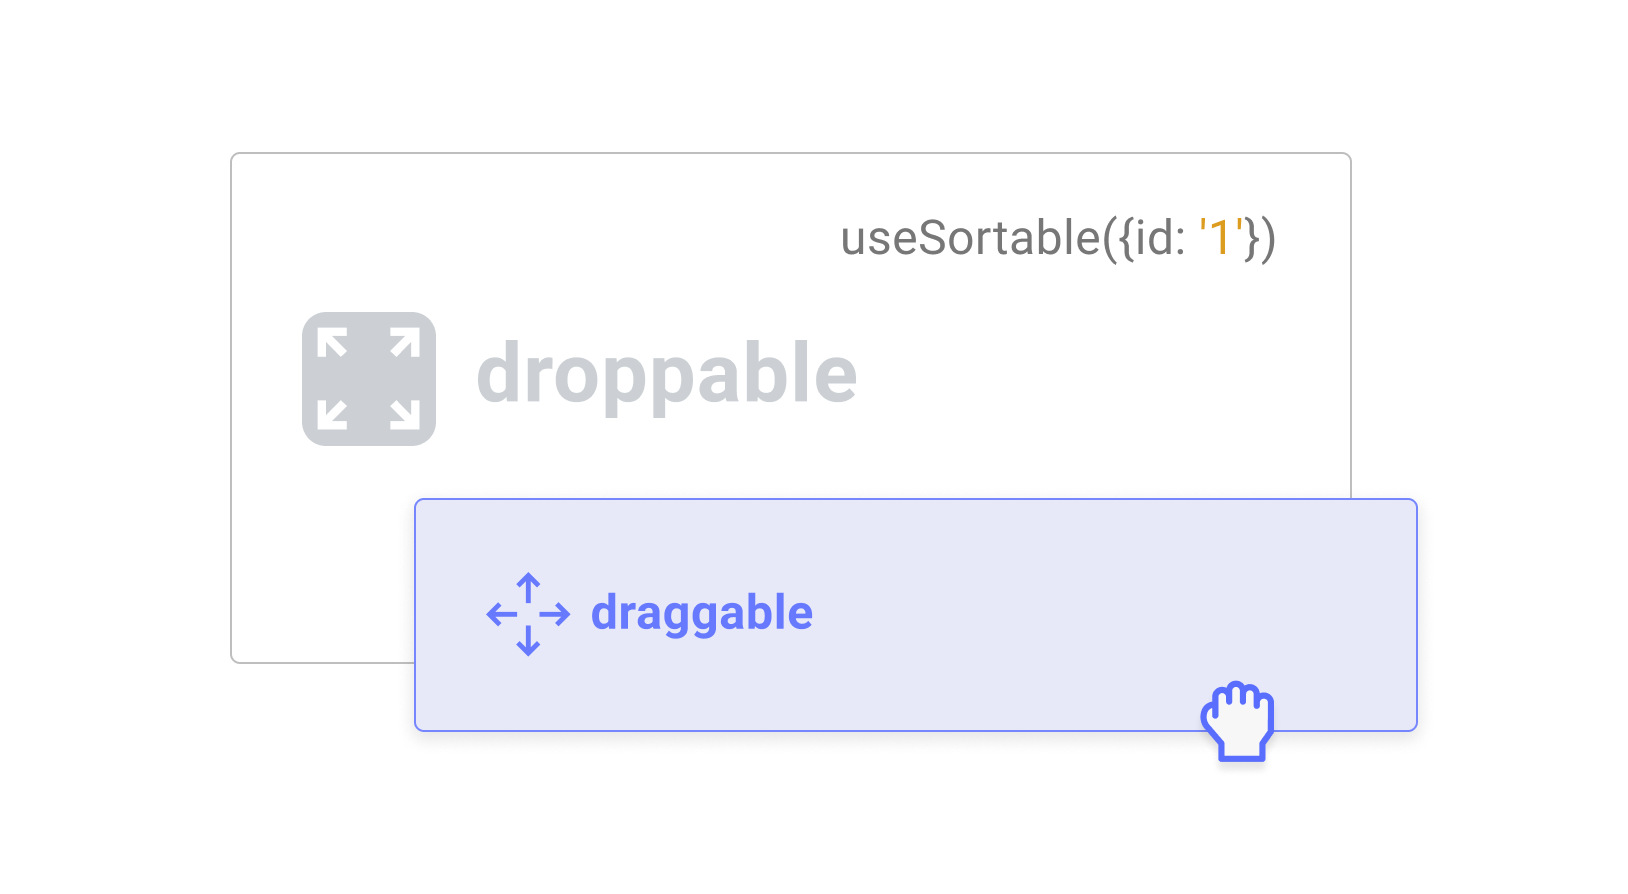 The useSortable hook is an abstraction that composes the useDroppable and useDraggable hooks